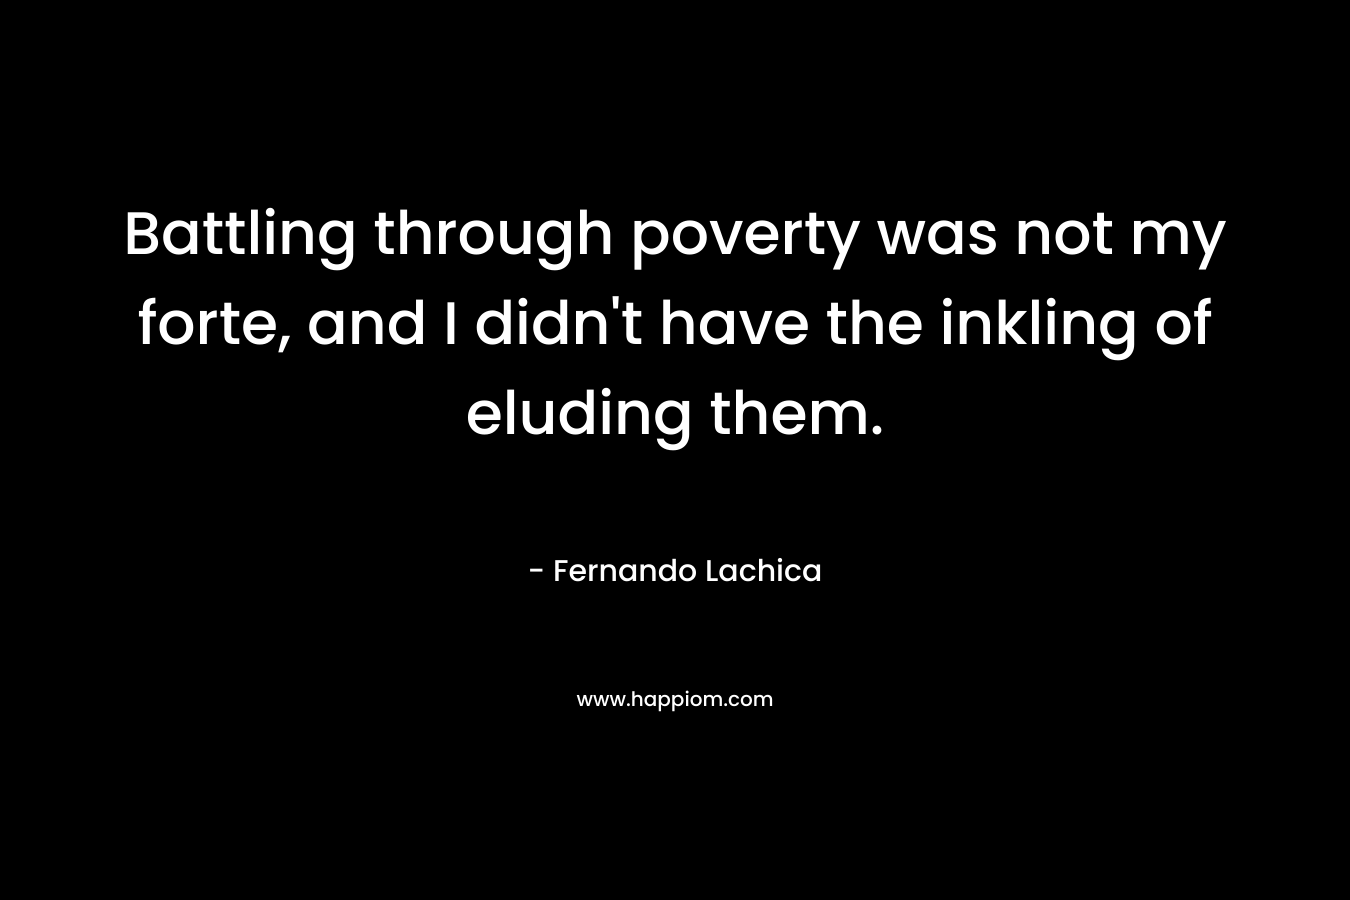 Battling through poverty was not my forte, and I didn't have the inkling of eluding them.